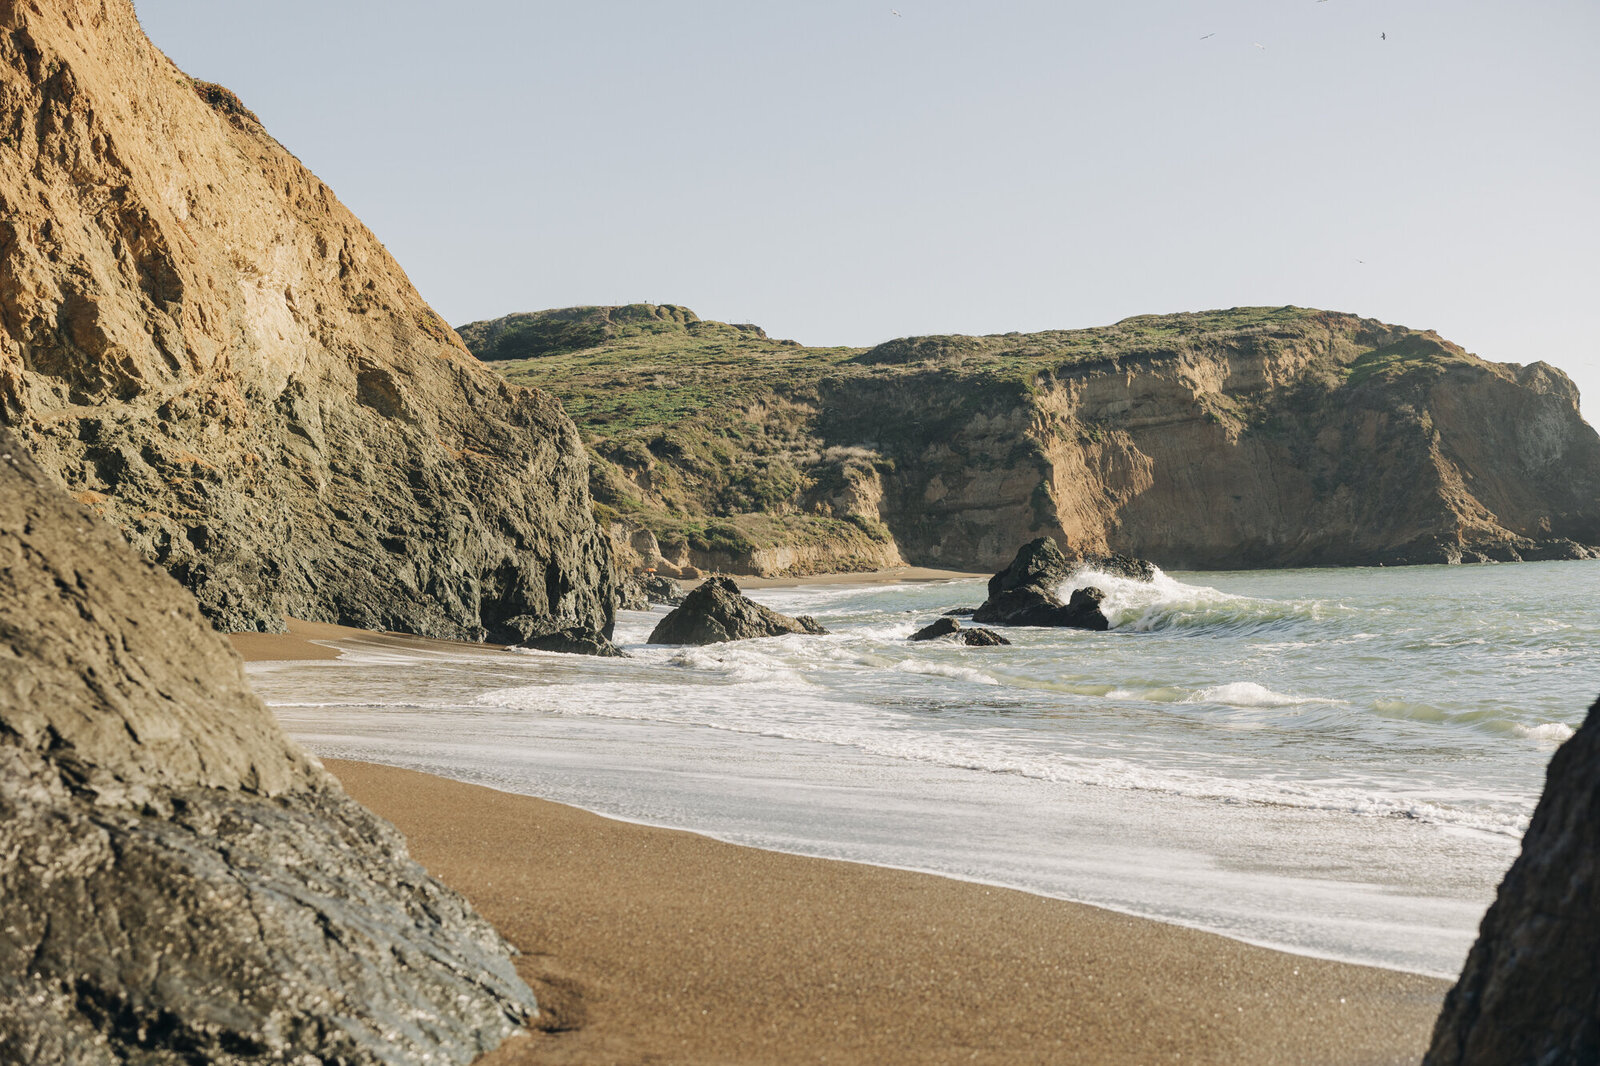 A serene coastline with cliffs and waves gently washing onto a sandy beach, perfect for a destination wedding photographer.